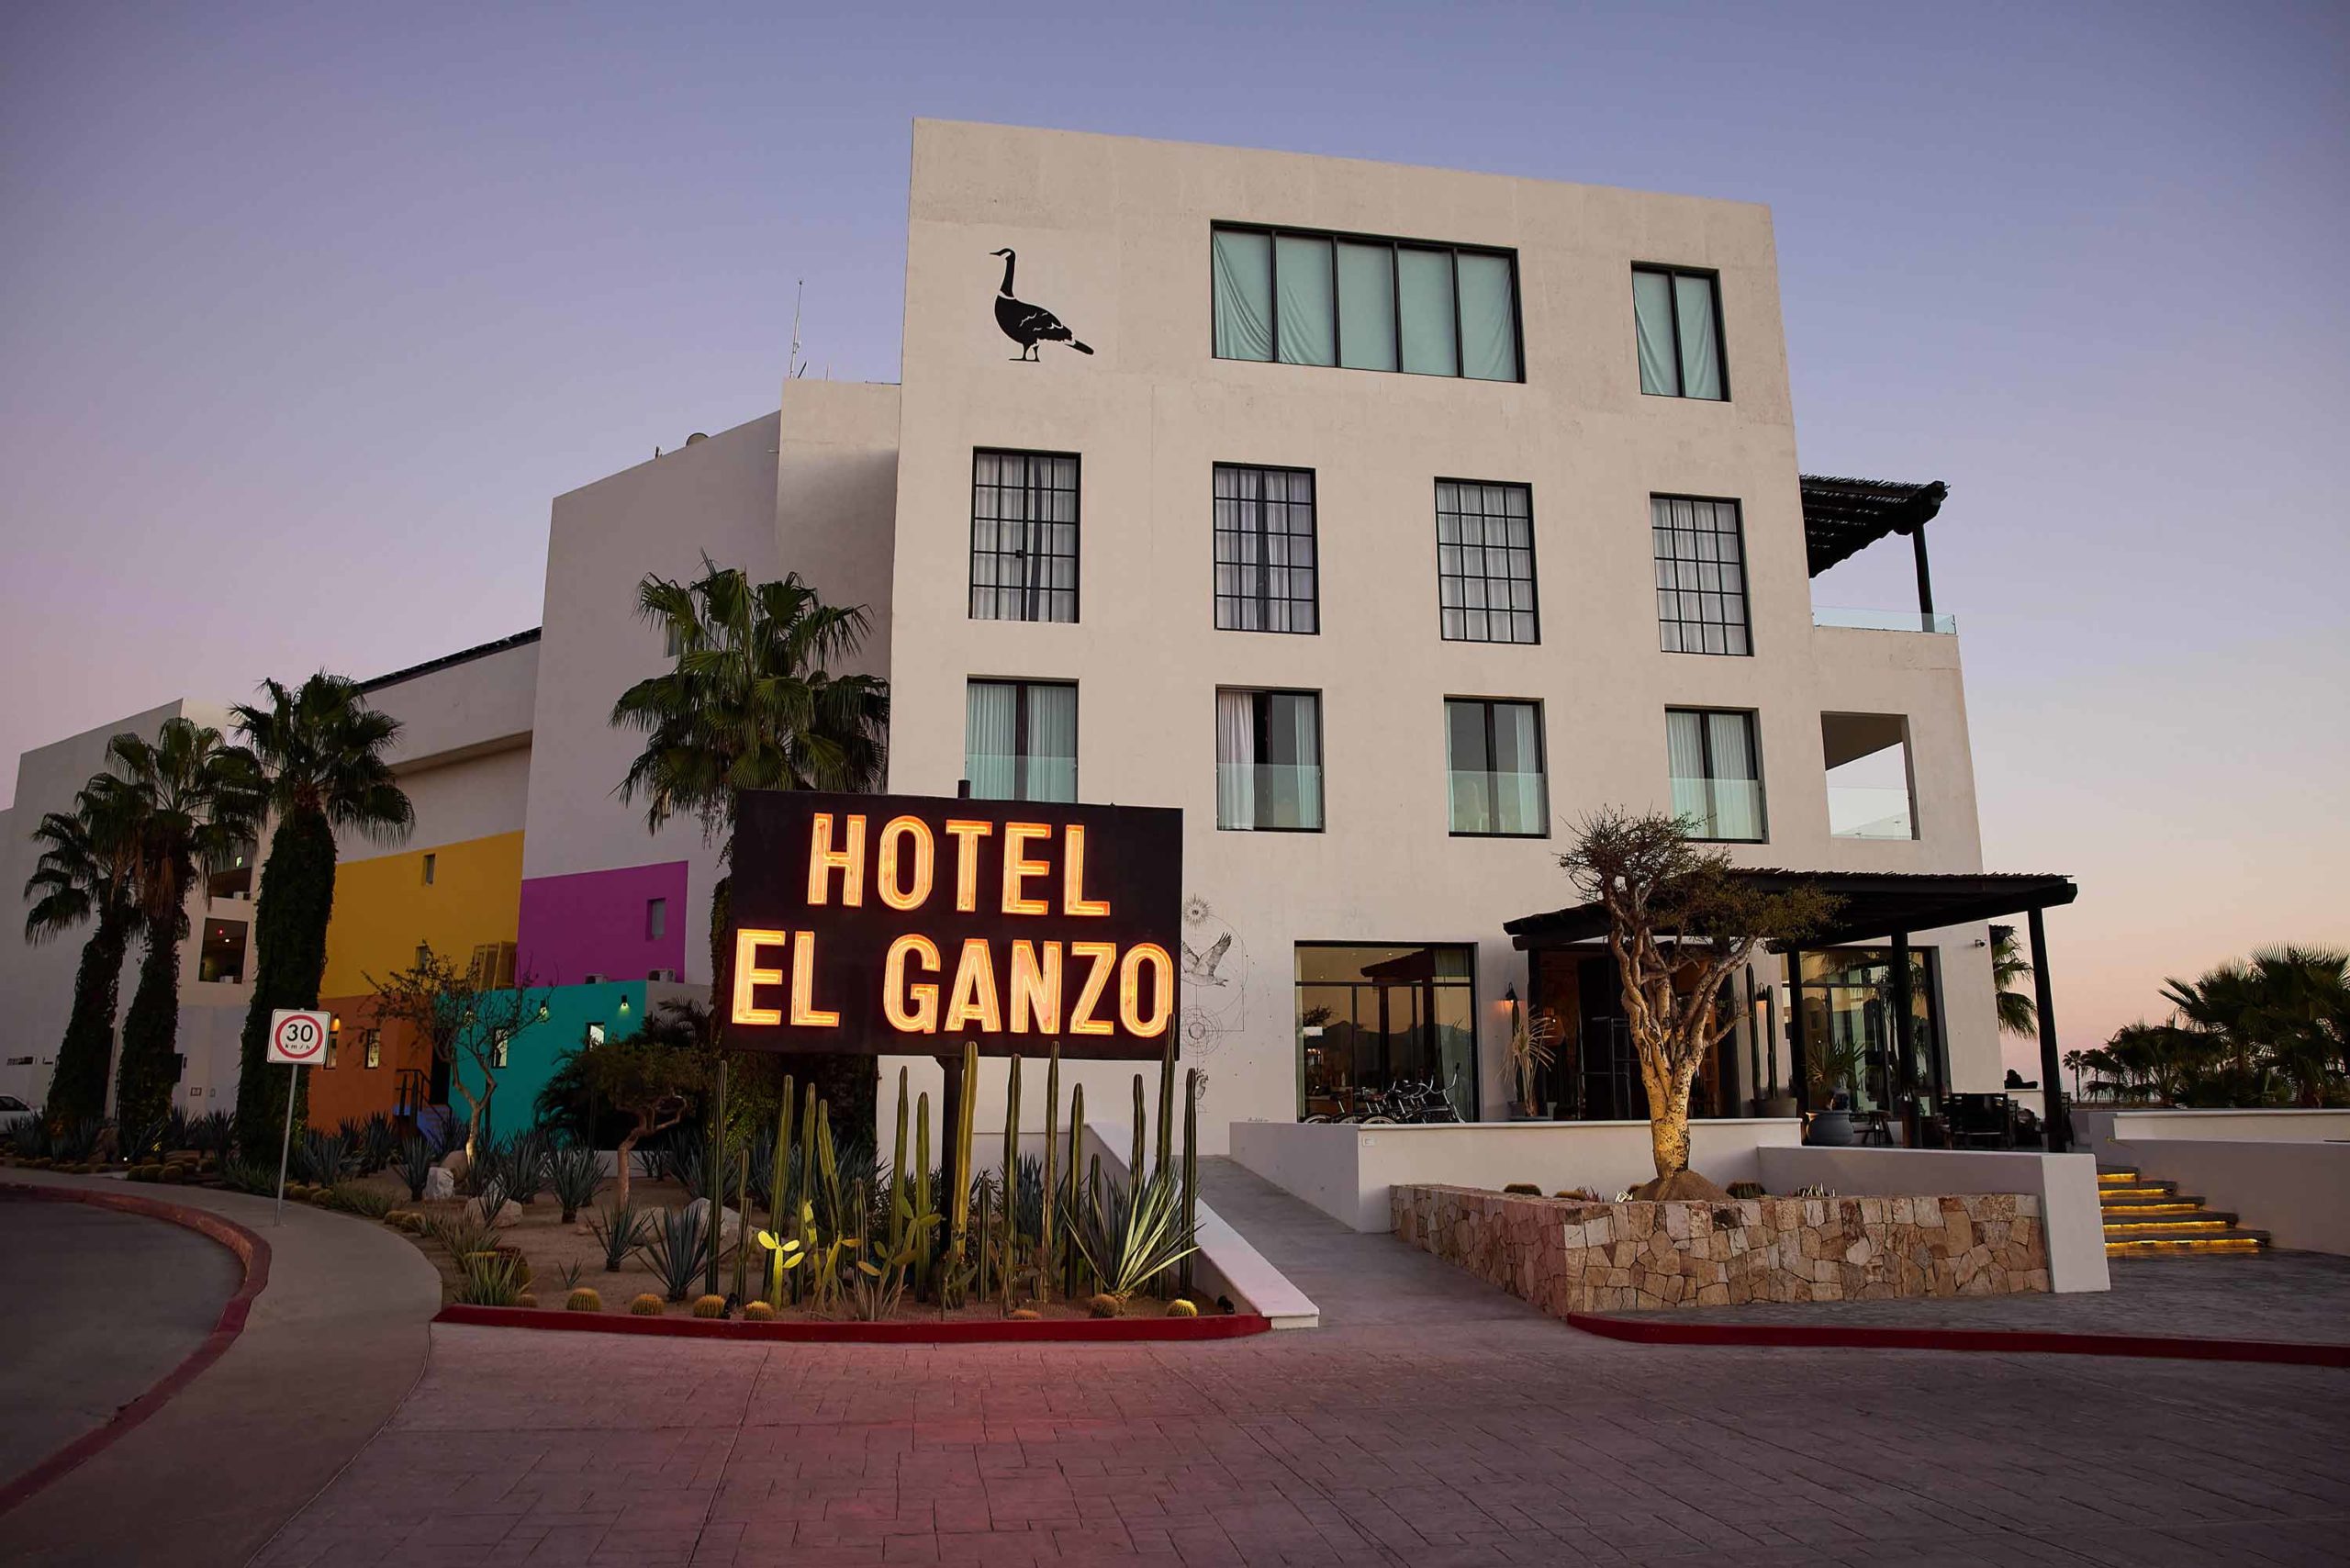  El Ganzo has quickly become the go-to spot for those looking for soundtracked sunsets — and sunrises